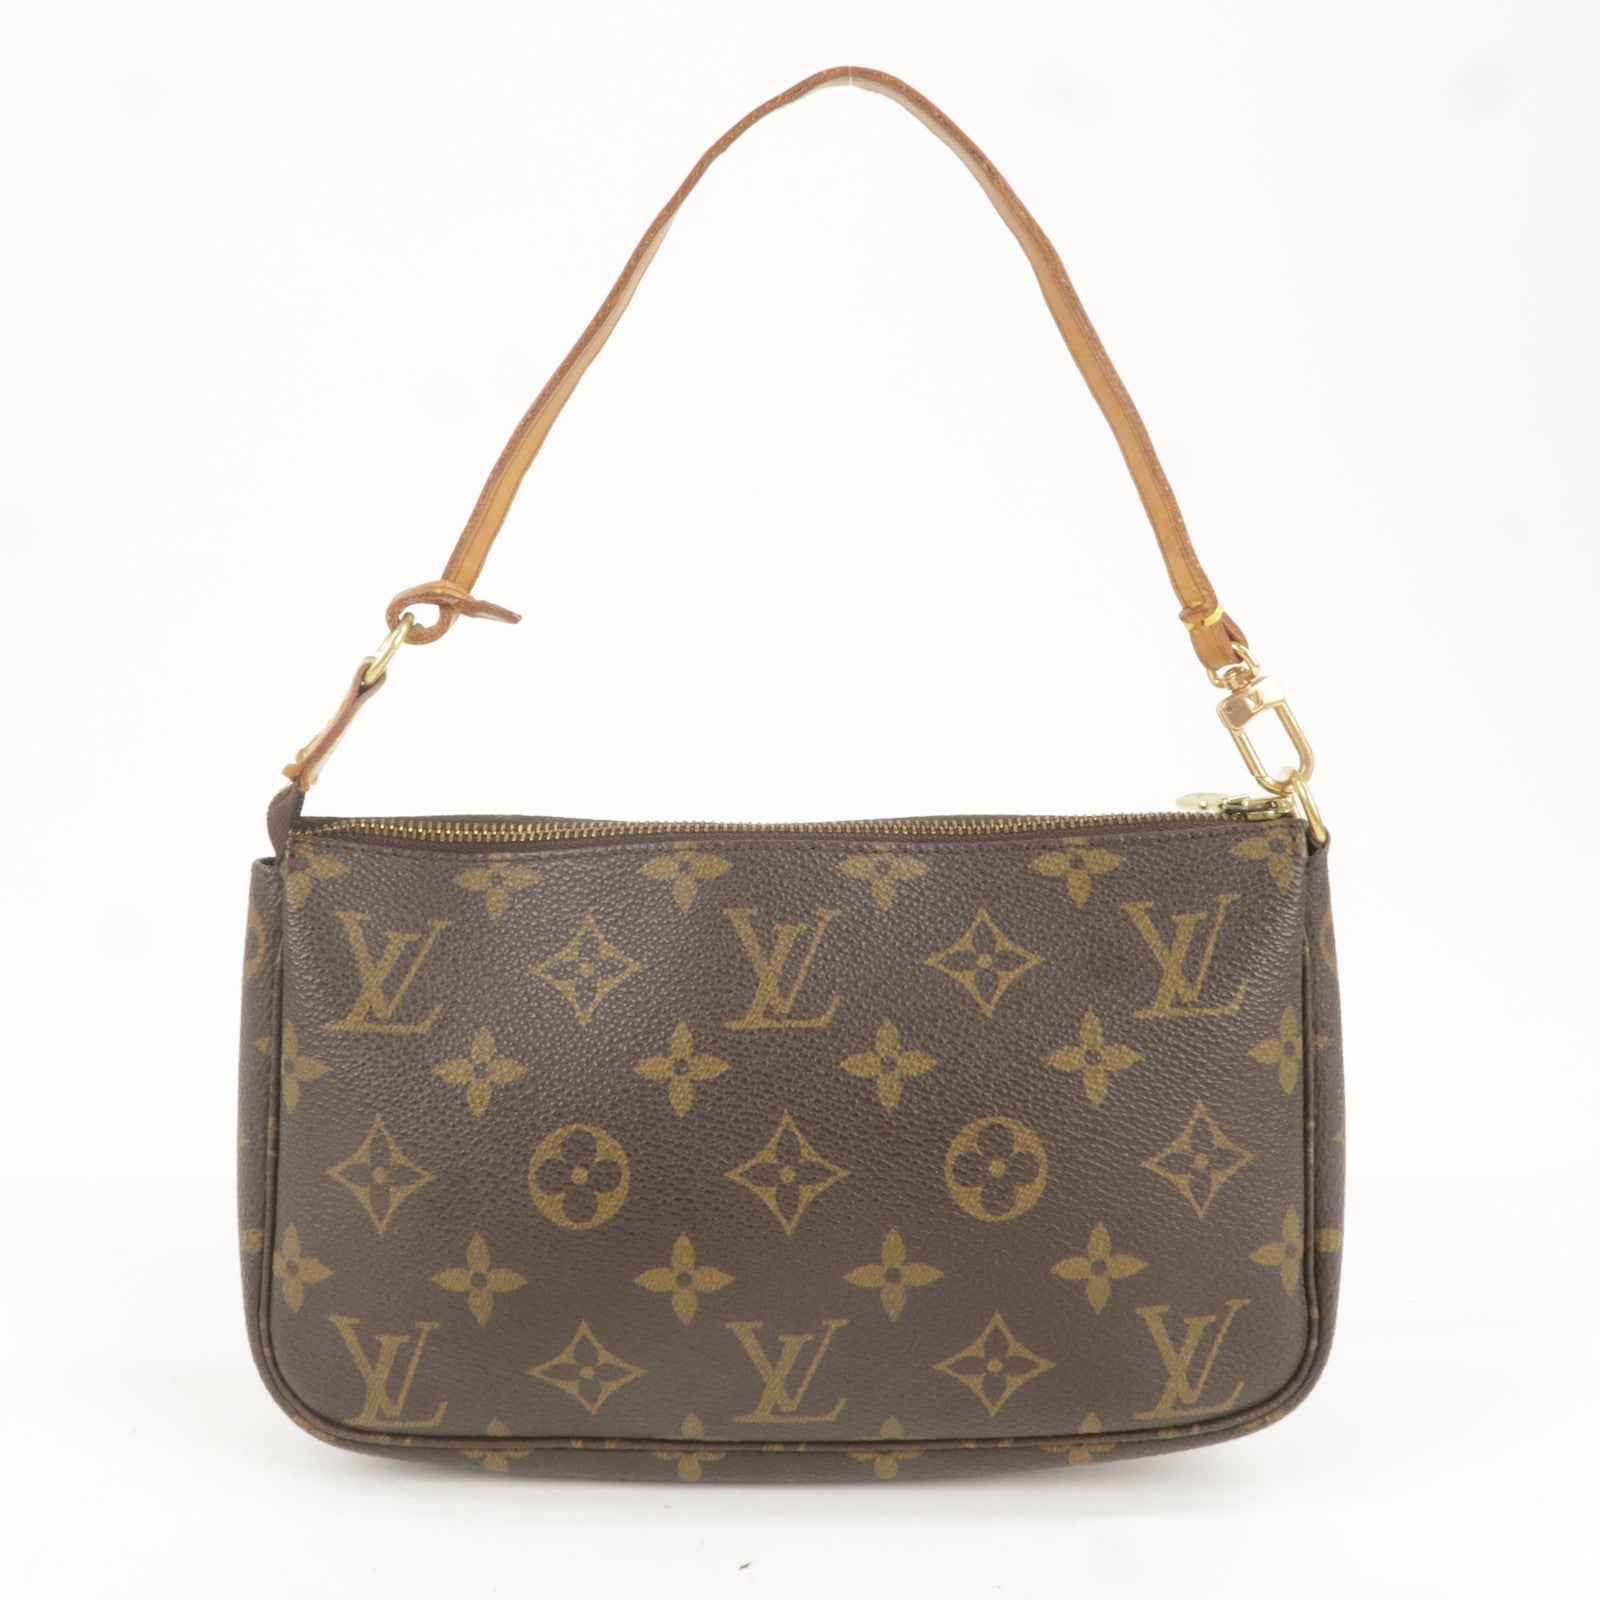 LOUIS VUITTON POCHETTE in Monogram Canvas and Beige Leather -  Israel